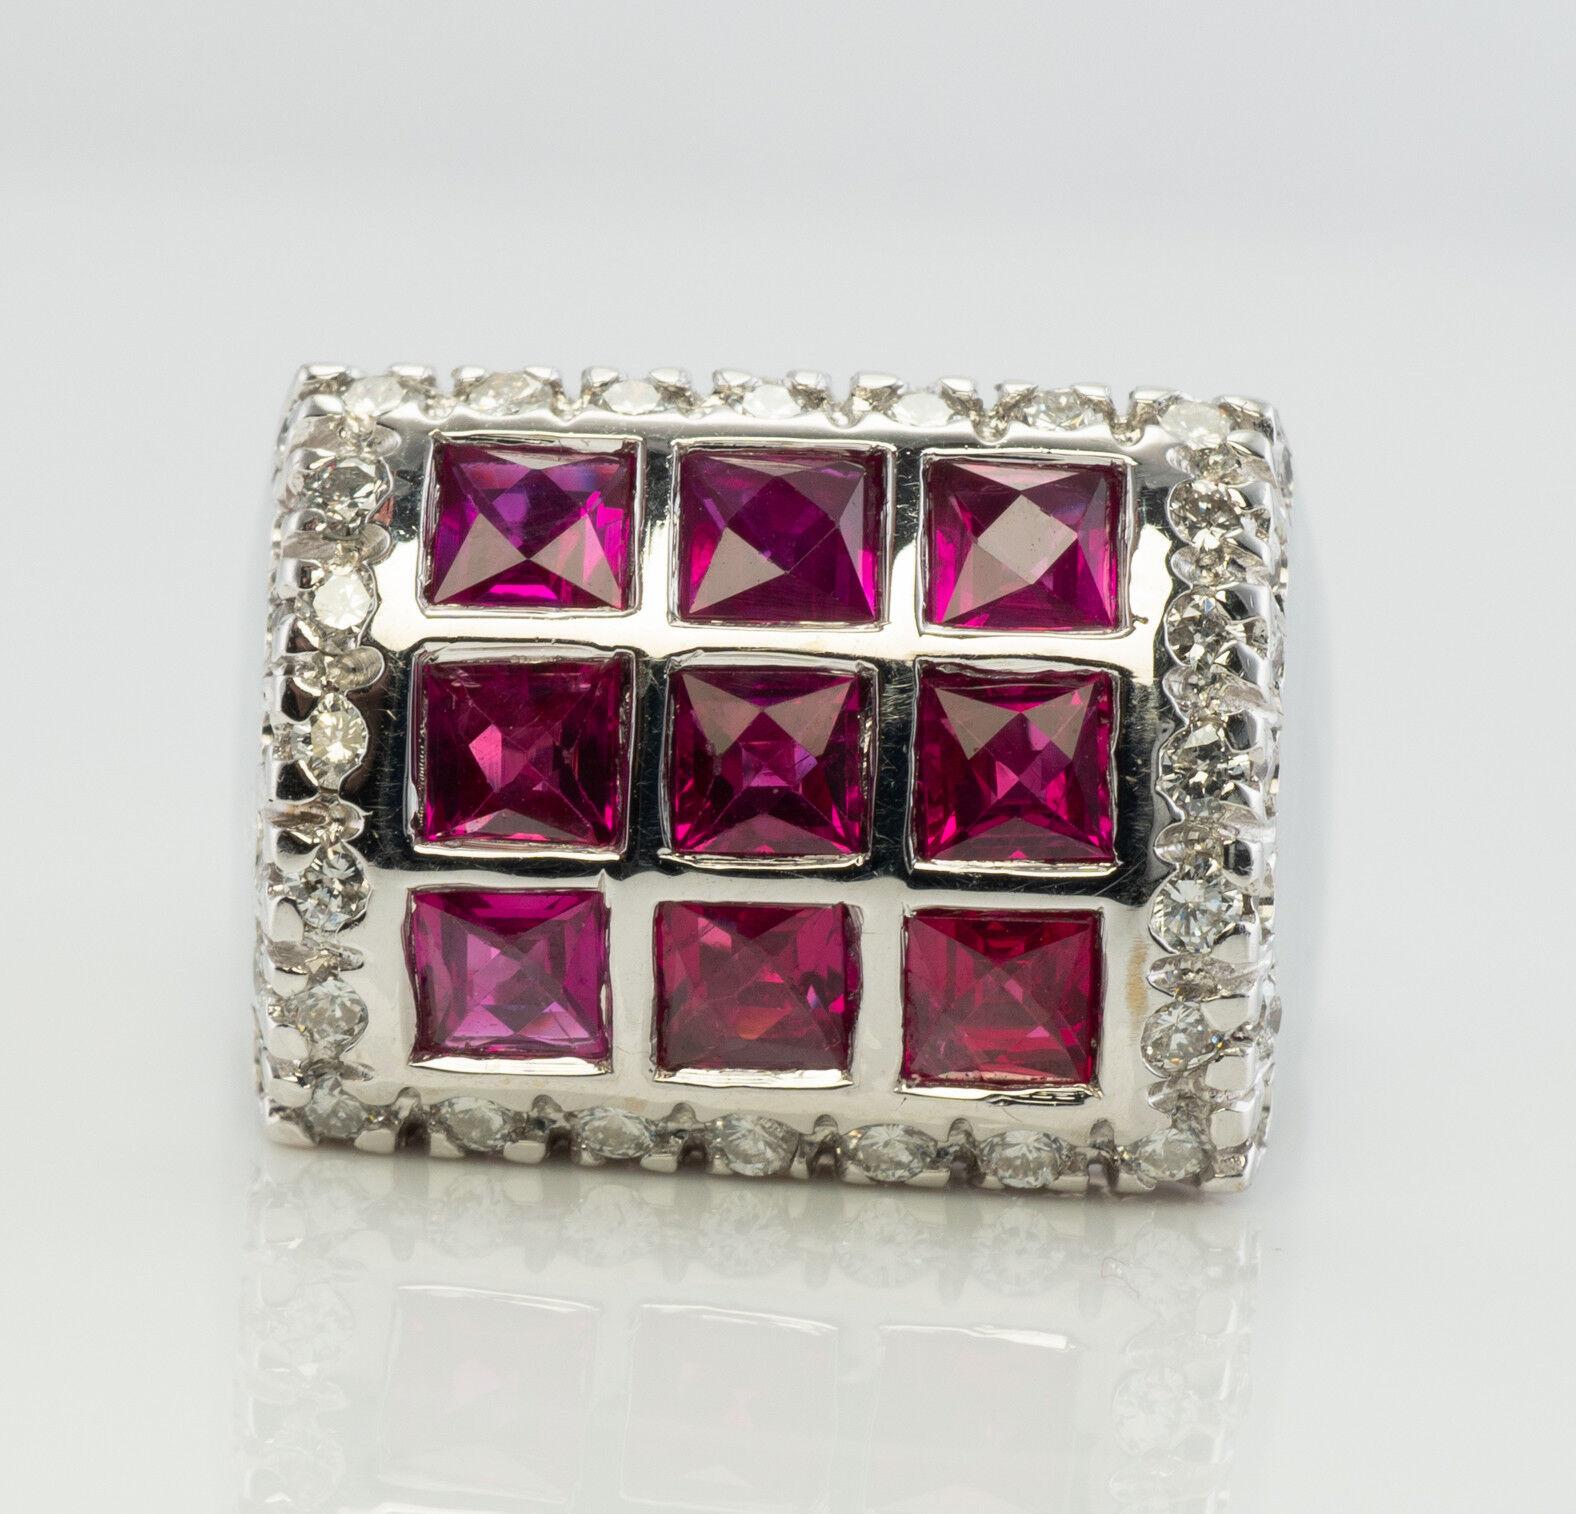 Diamond Ruby Ring 18K White Gold Band Geometric

This gorgeous estate ring is finely crafted in solid 18K White Gold and set with high quality lab-created Rubies and Diamonds. Nine square cut Rubies measure 3mm for the grand total 1.44 carats. These